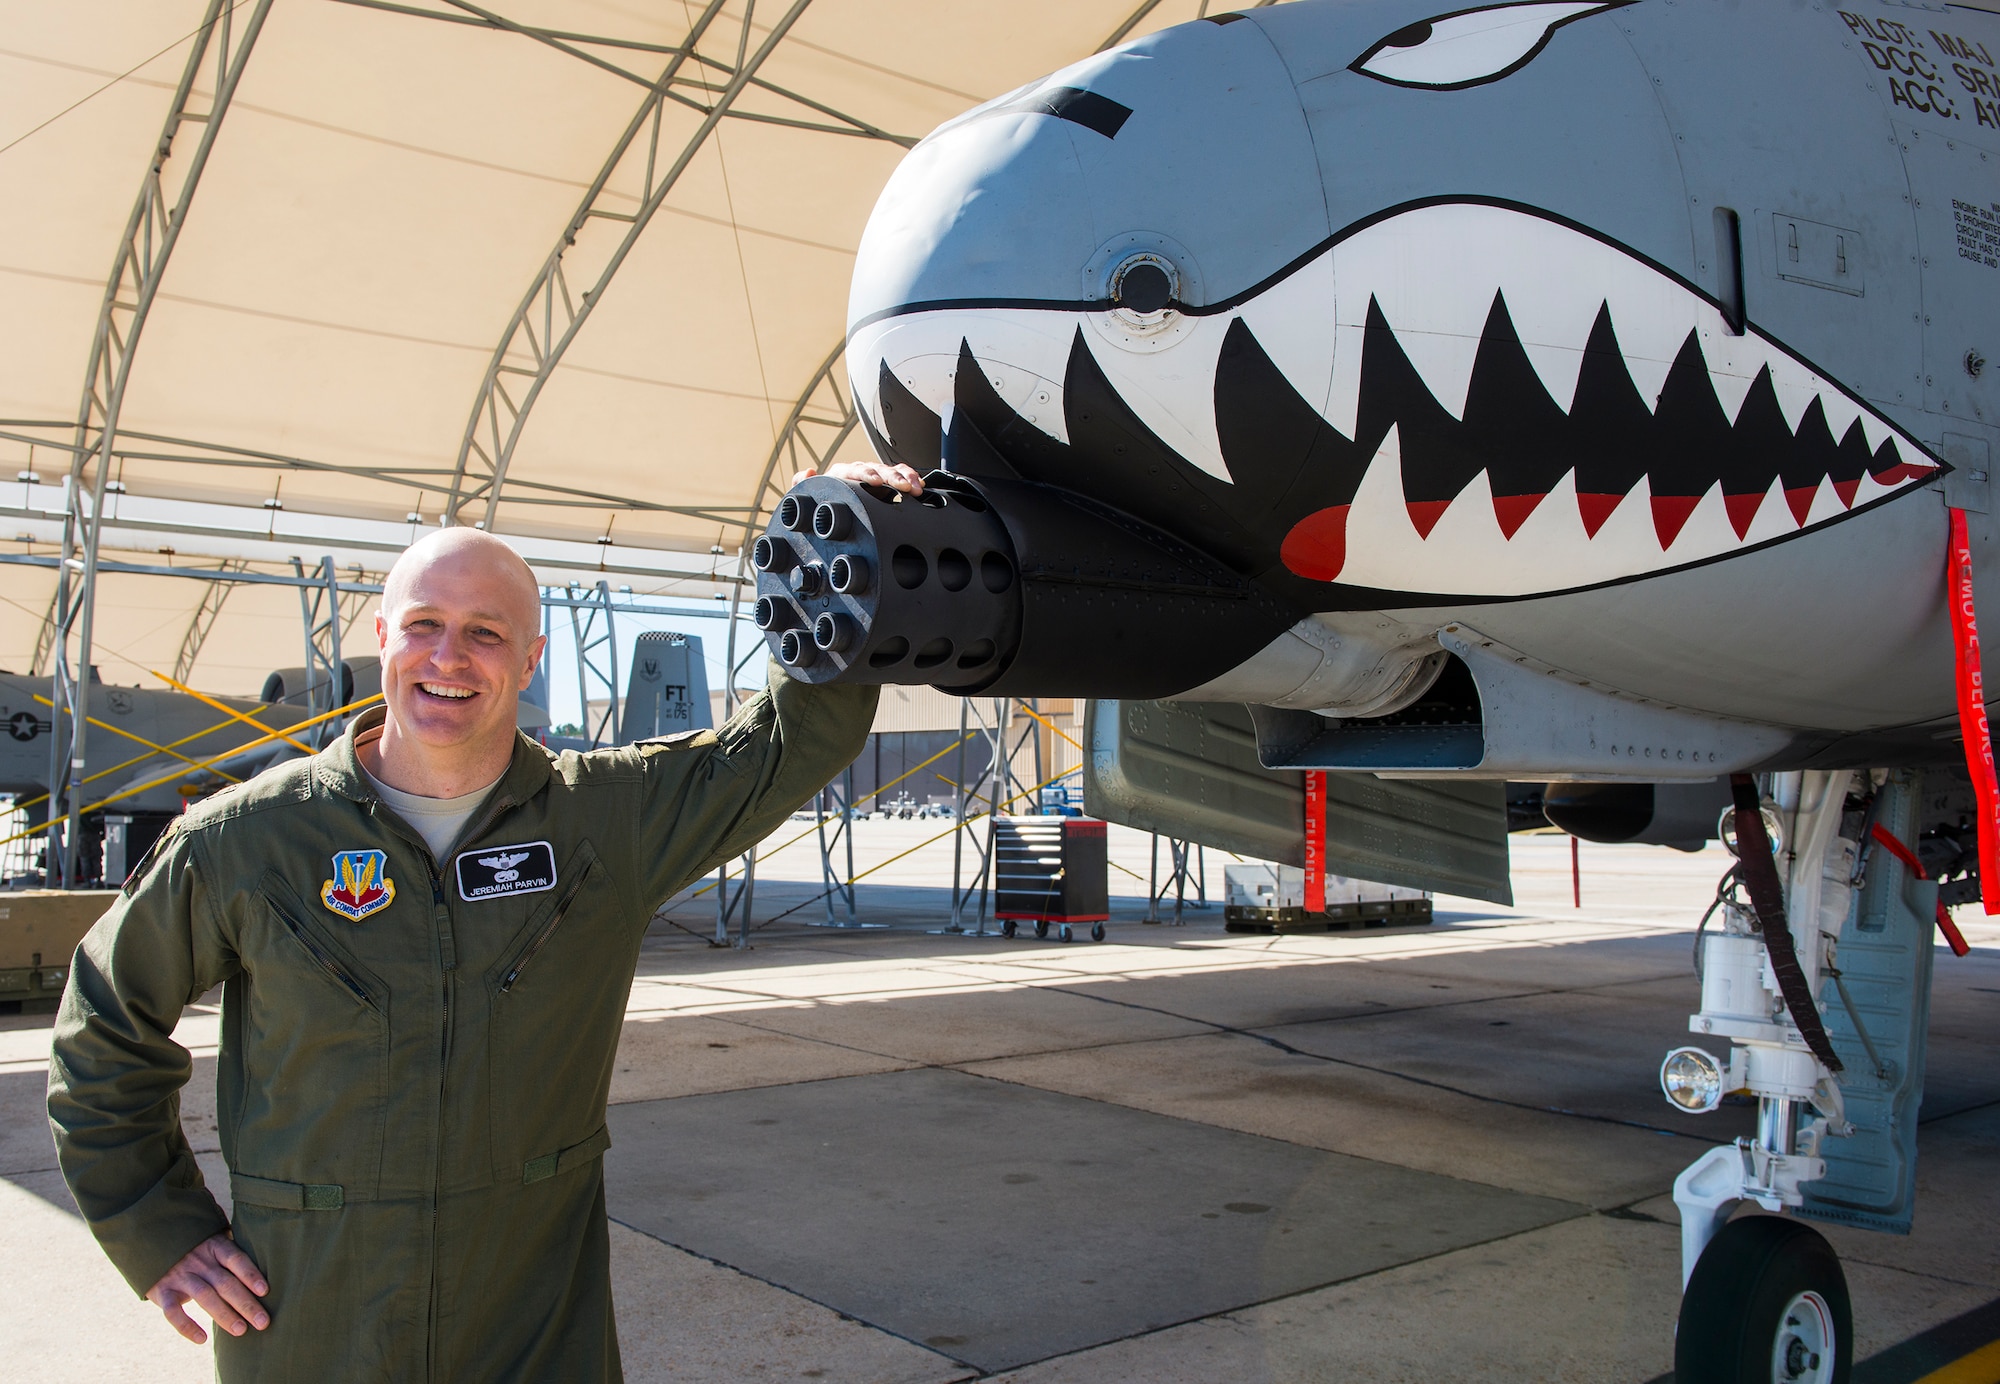 U.S. Air Force Maj. Jeremiah ‘Bull’ Parvin, 75th Fighter Squadron director of operations, poses for a photo in front of his A-10C Thunderbolt II Jan. 28, 2015, at Moody Air Force Base, Ga. Parvin was awarded the Distinguished Flying Cross with Valor Jan. 29,2015, for his selfless and heroic actions that he displayed seven years earlier during a deployment to Afghanistan. (U.S. Air Force photo by Airman 1st Class Ceaira Tinsley/Released)